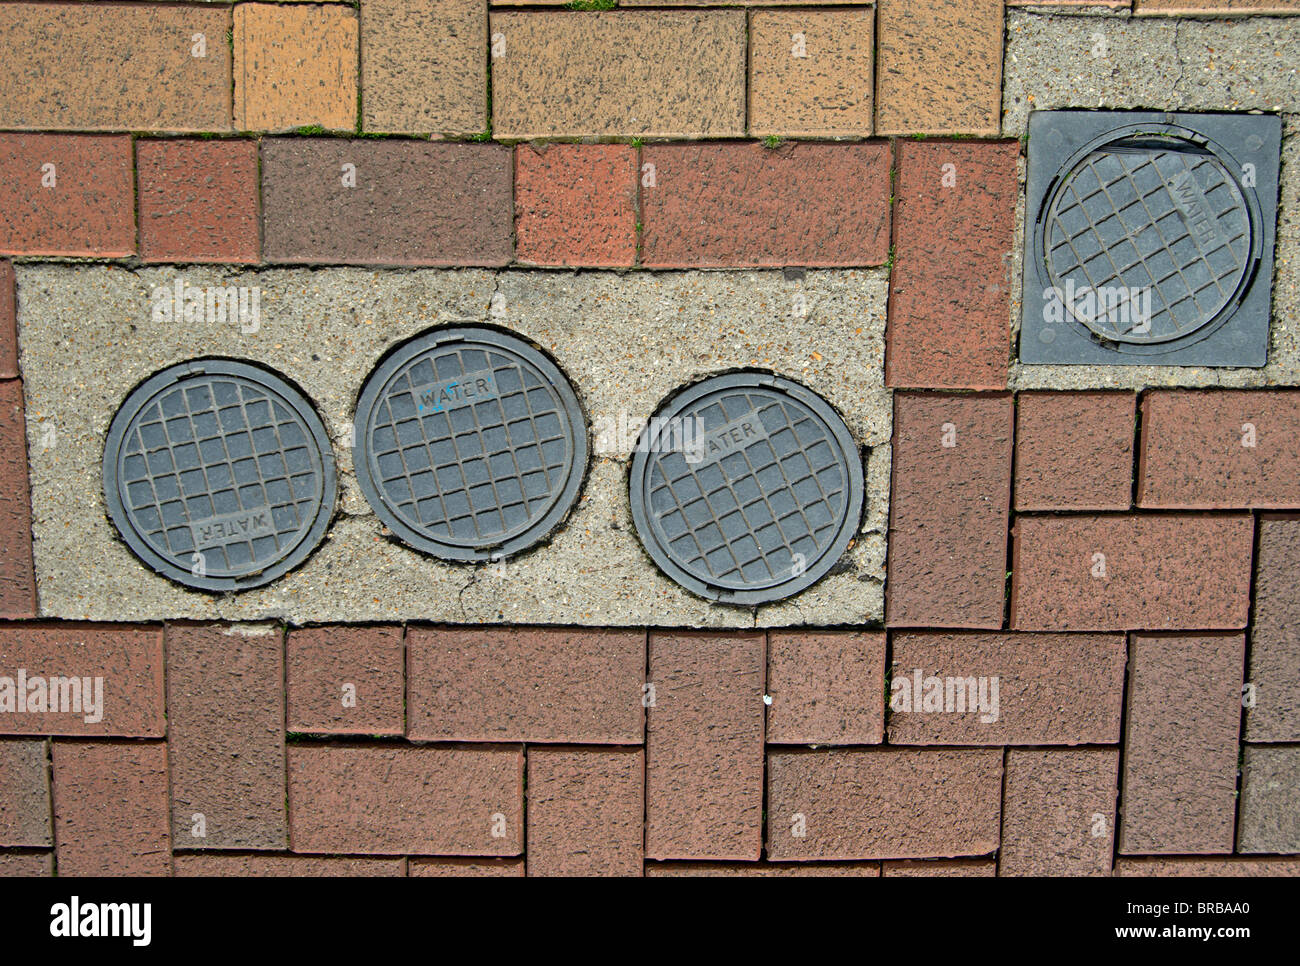 water main covers on a brick-paved street in putney, southwest london, england Stock Photo